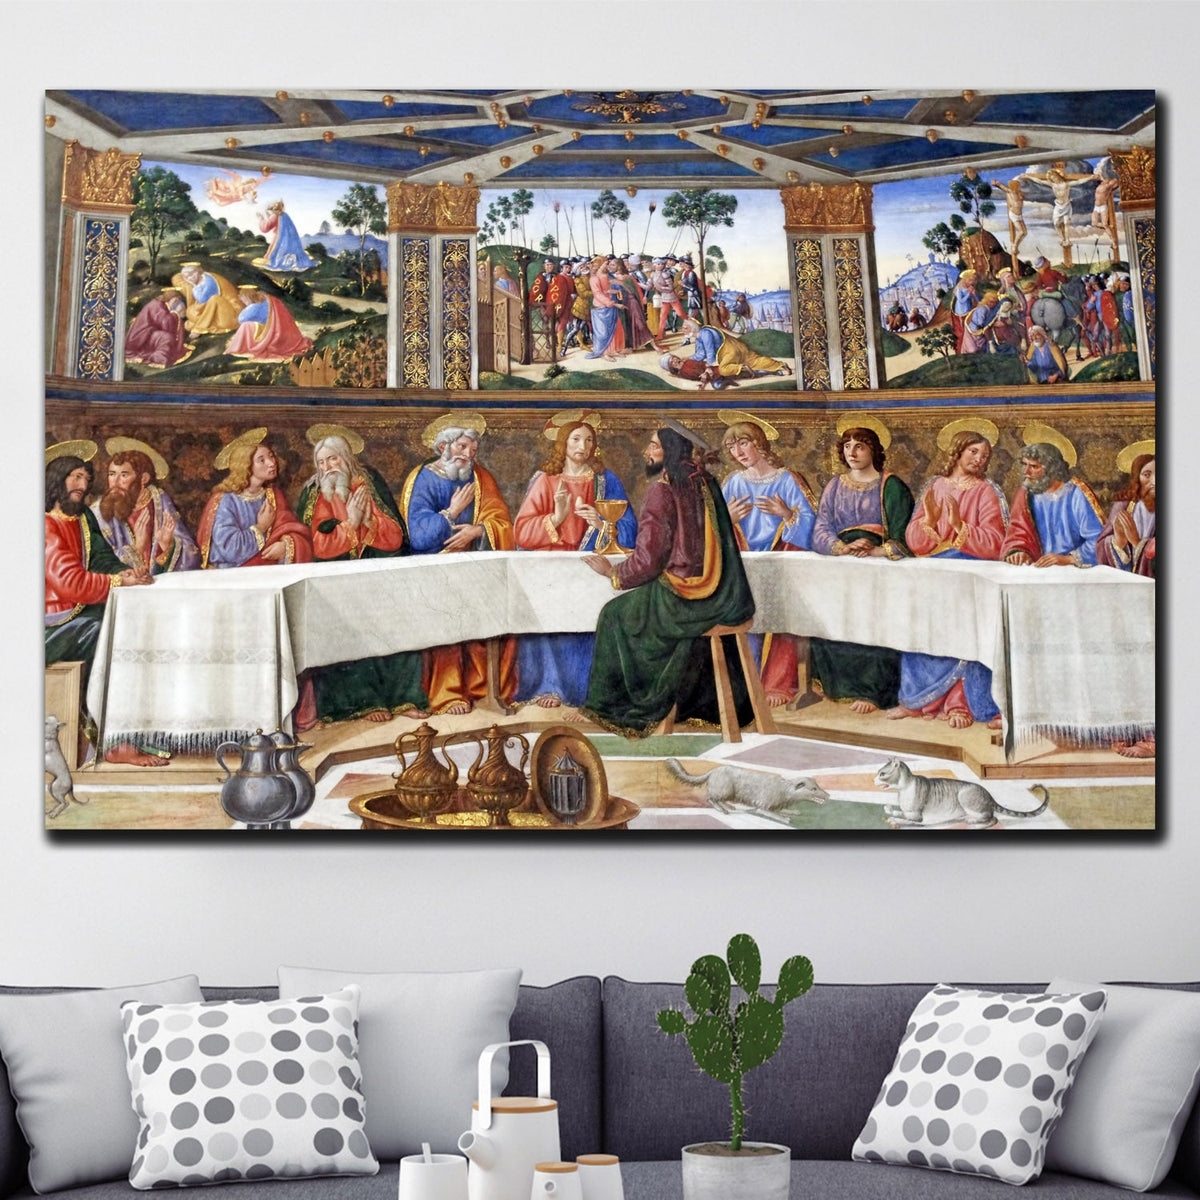 https://cdn.shopify.com/s/files/1/0387/9986/8044/products/TheLastSupperofChristCanvasArtprintStretched-3.jpg